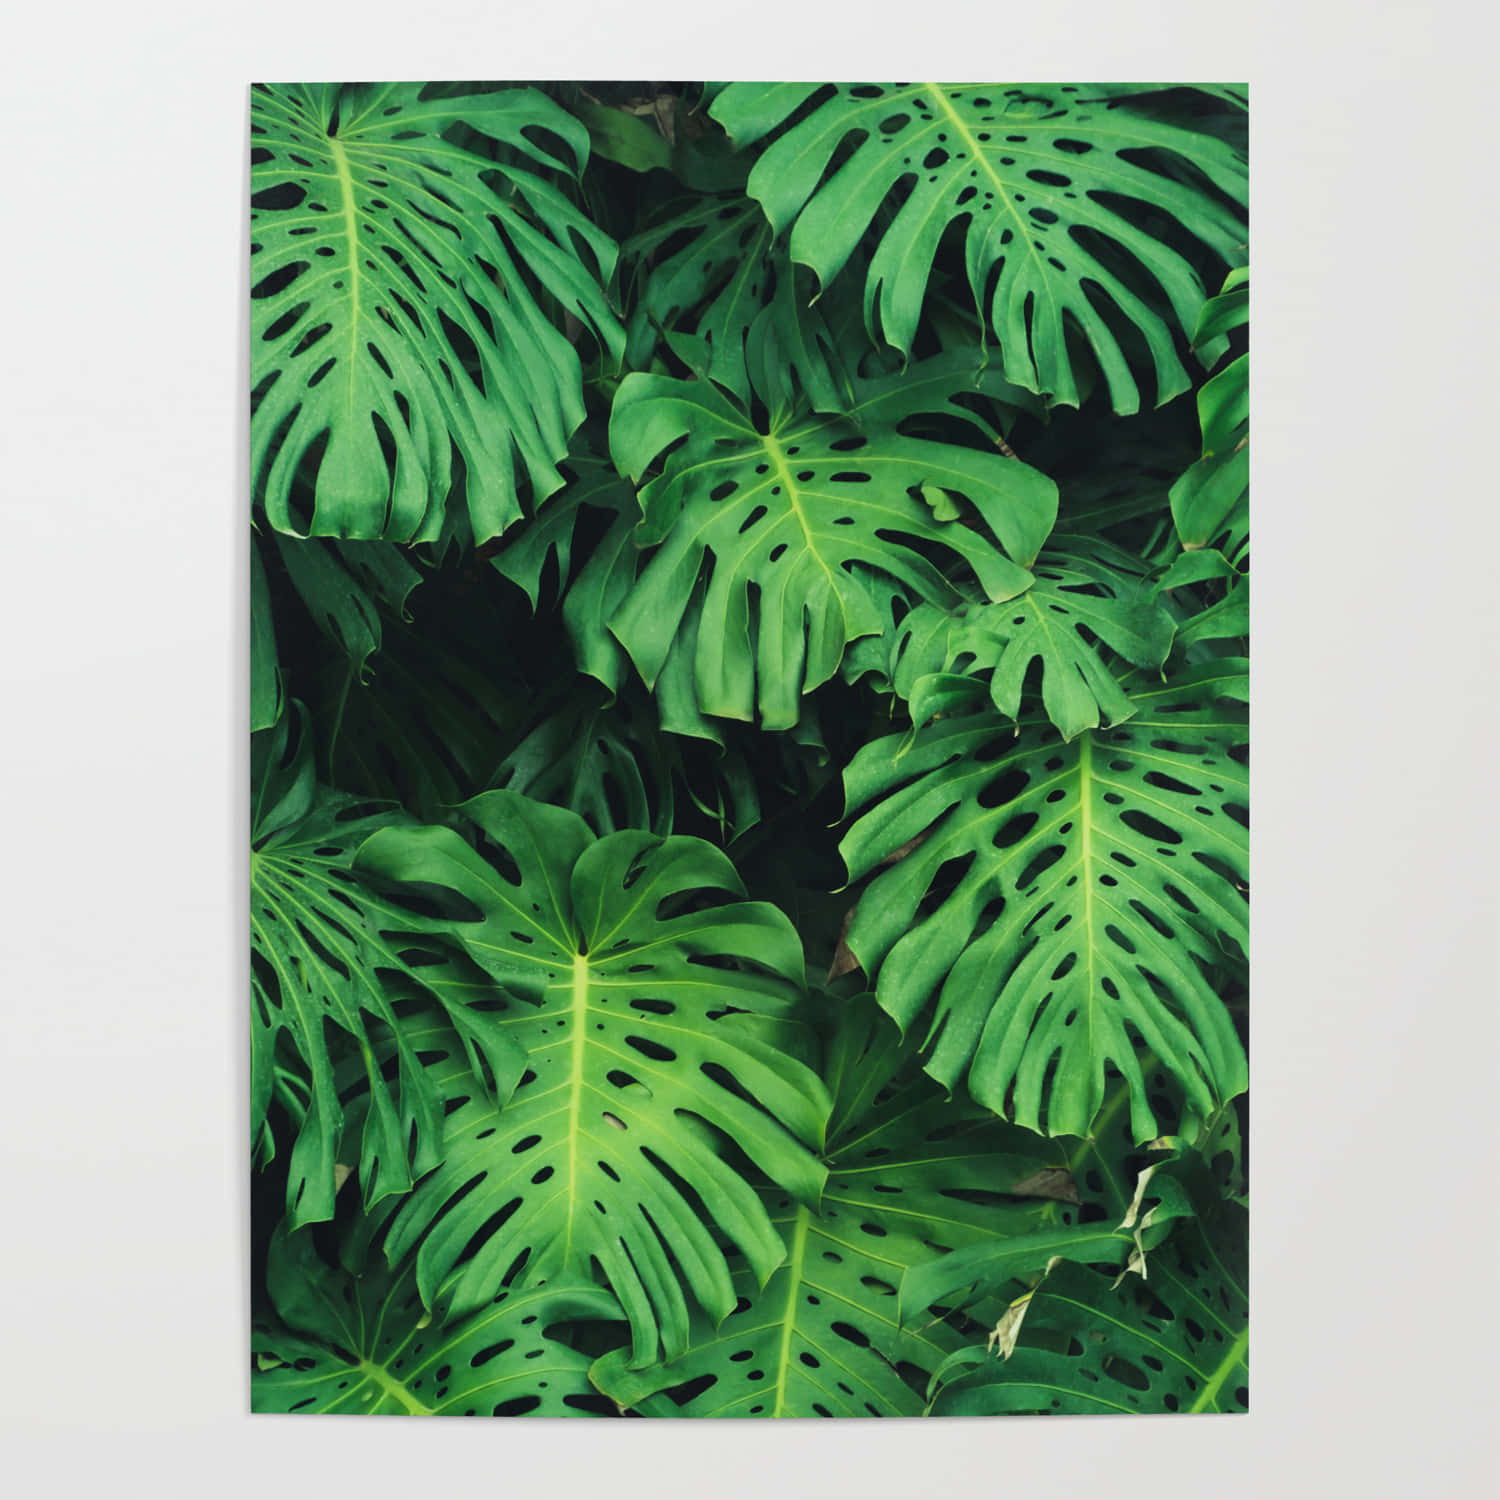 Catch a glimpse of nature's beauty with this vivid aesthetic leaf background!